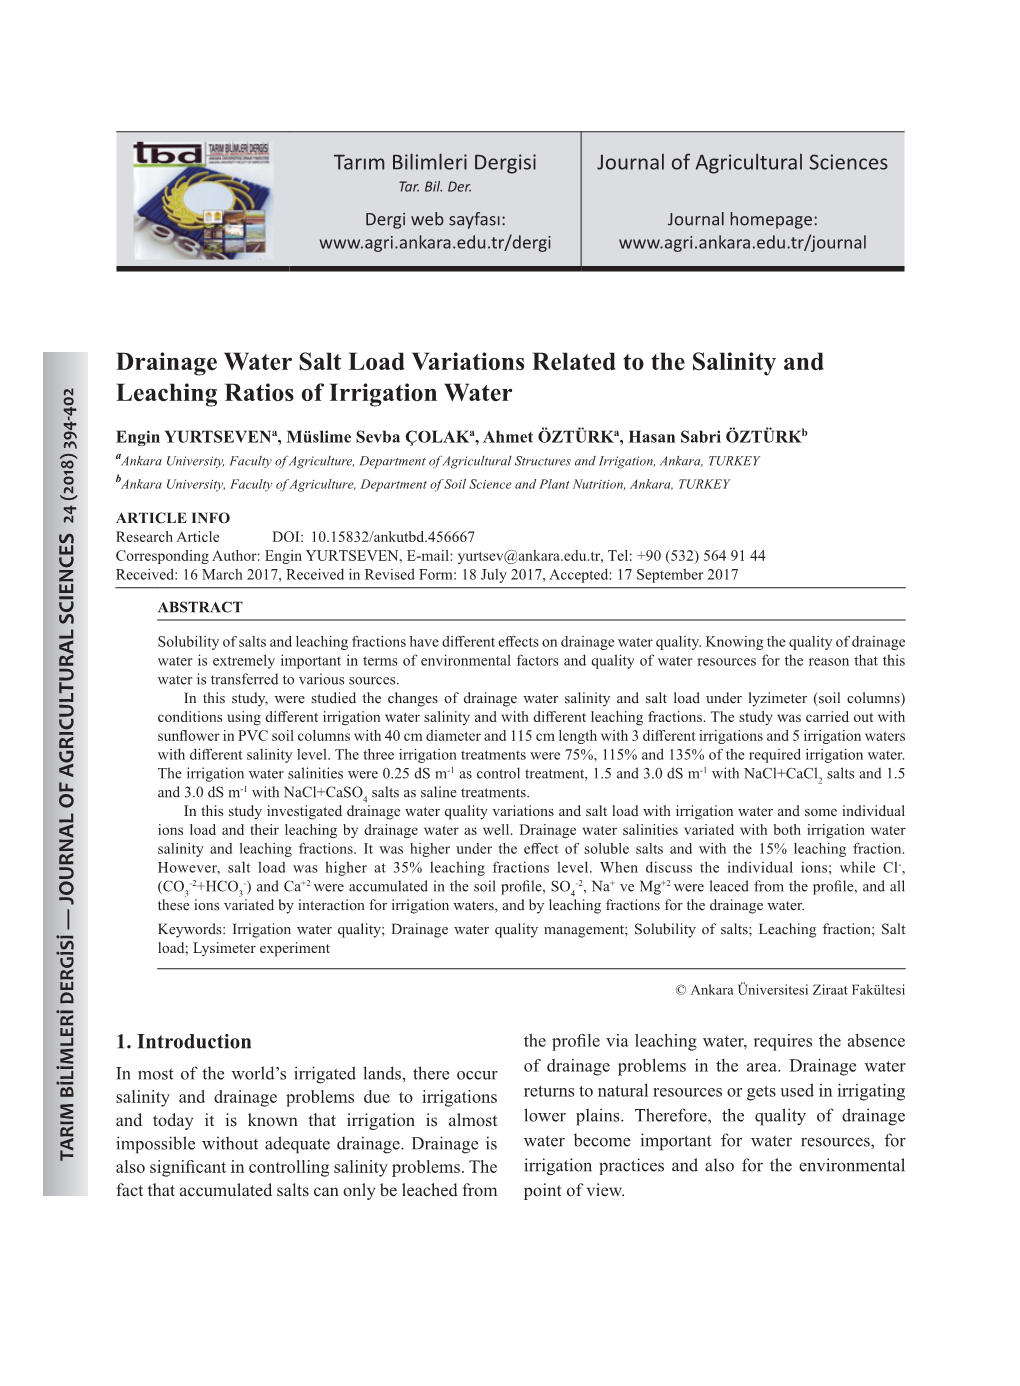 Drainage Water Salt Load Variations Related to the Salinity and Leaching Ratios of Irrigation Water